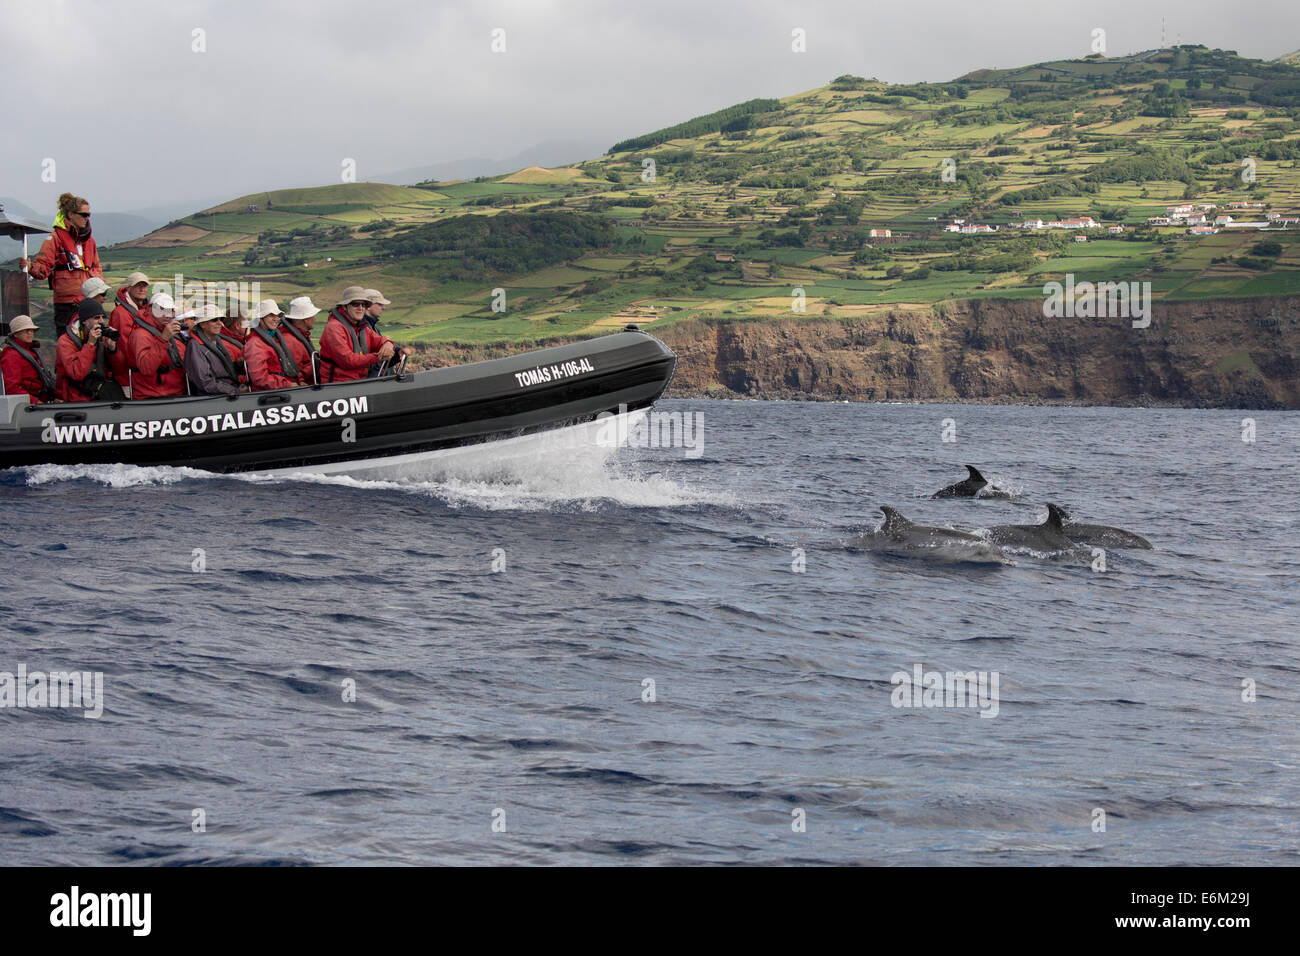 Tourists watch an Atlantic Spotted Dolphin (Stenella frontalis) during a Whale-Watching trip. Azores, Atlantic Ocean. Stock Photo